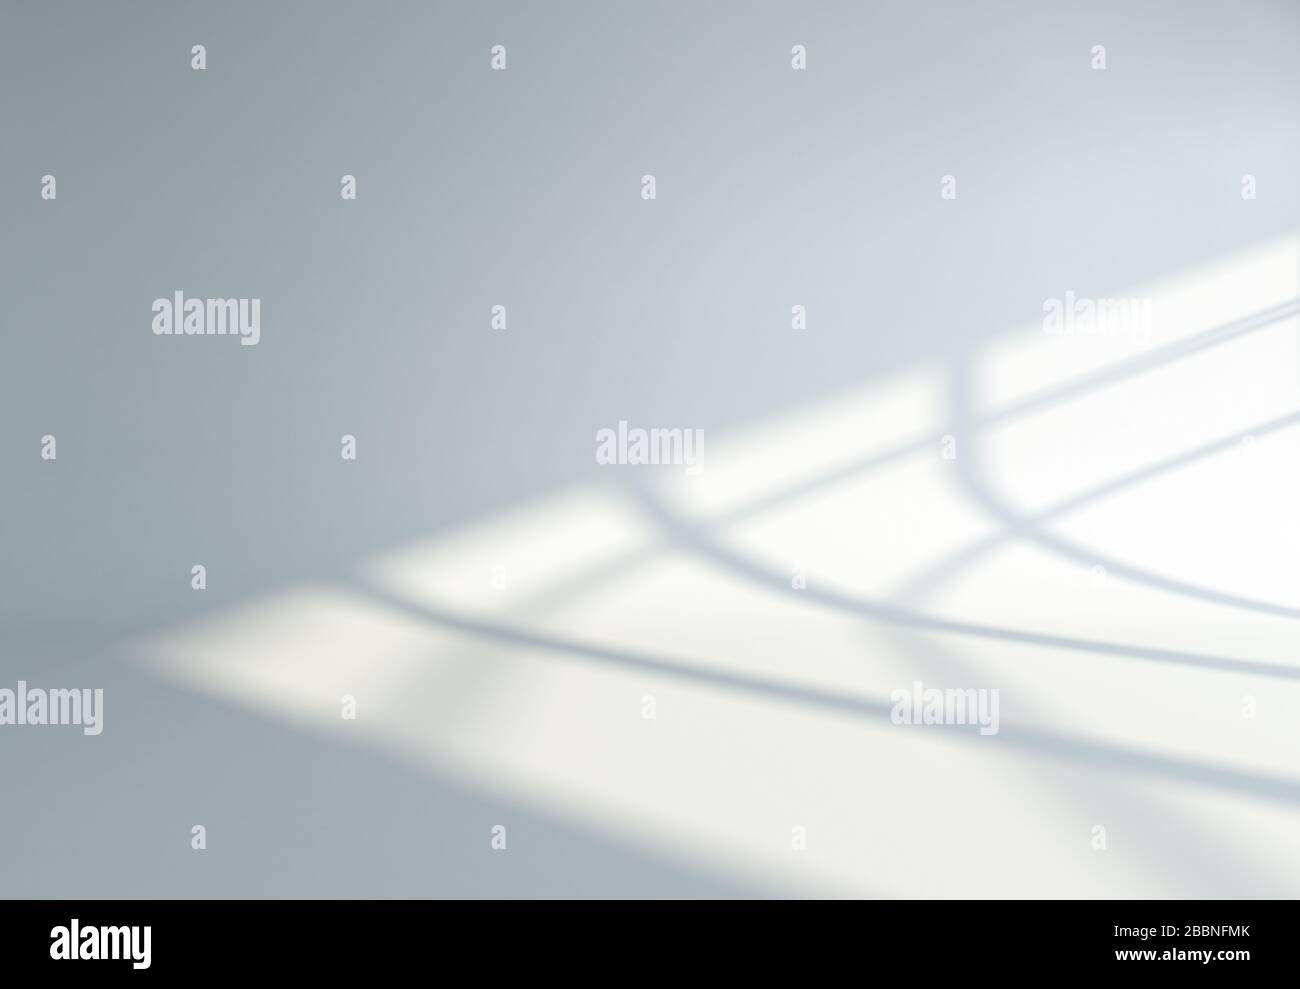 A 3D render of a hdhdhd on a white background Stock Photo - Alamy